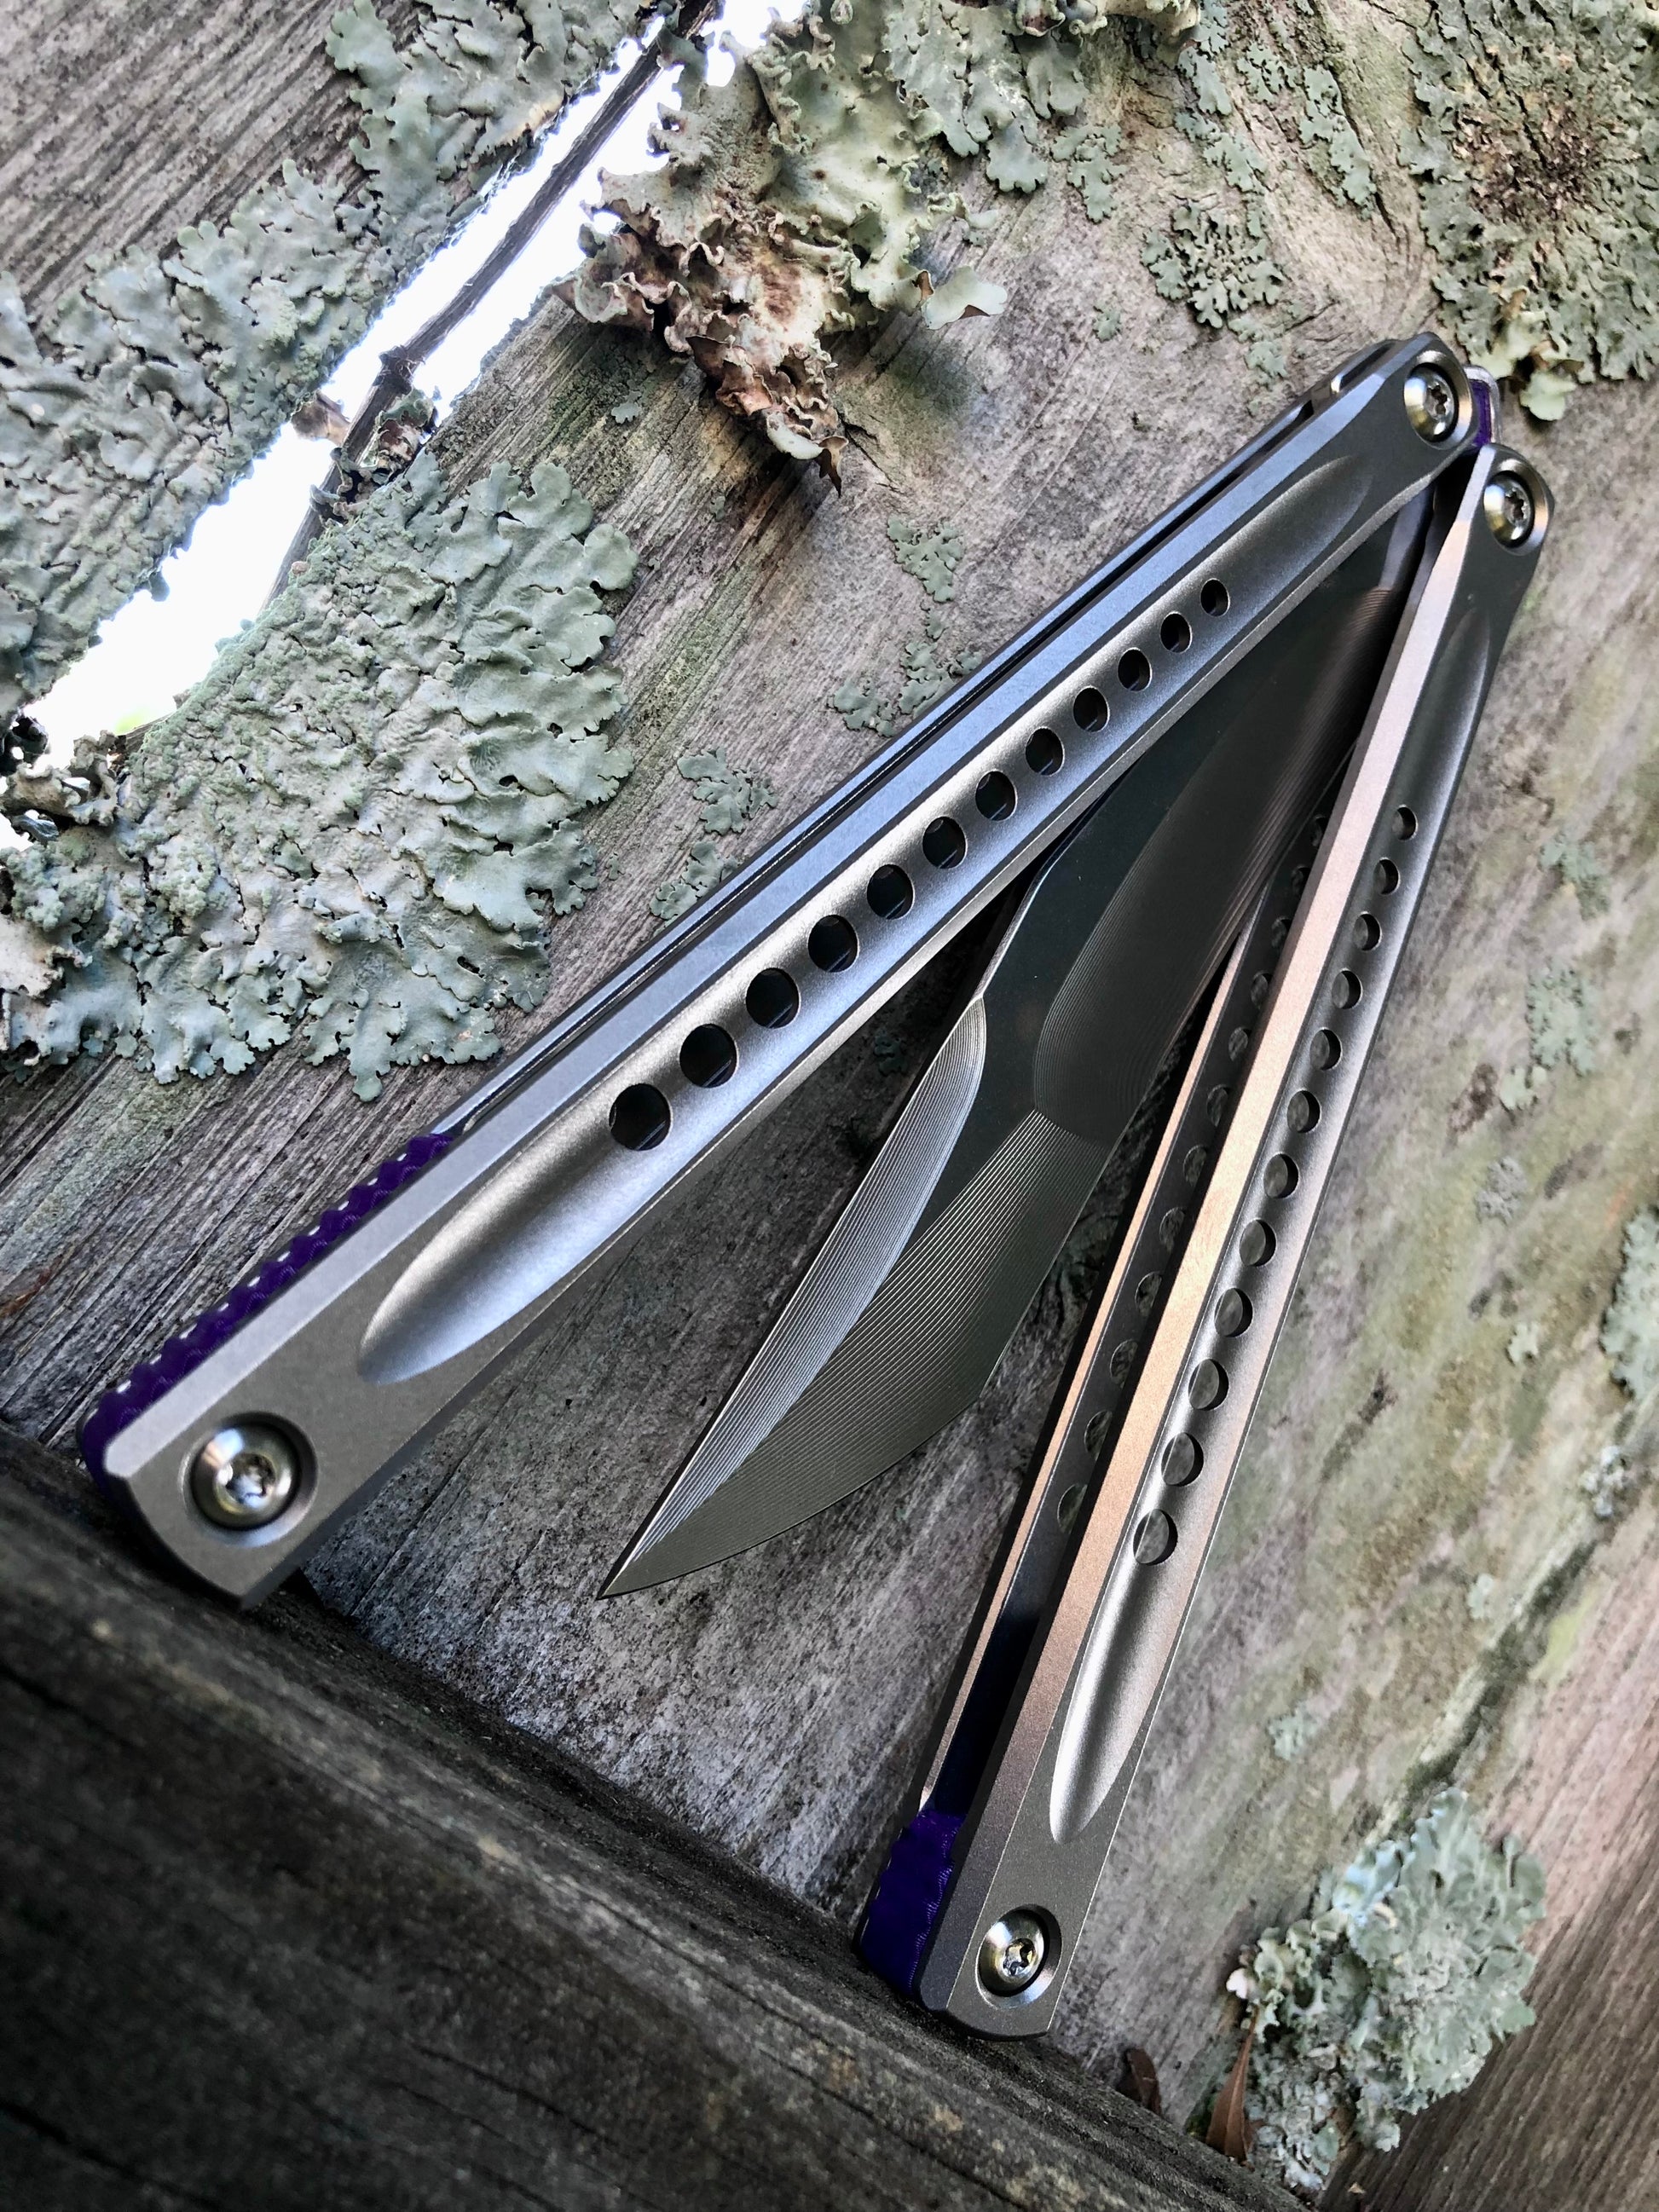 These Zippy spacers for the JK Design Embargo Balisong are made in-house from a rubbery, shatter-proof polyurethane. They add positive "saw-tooth" jimping to the Embargo and include a tungsten weight system for adjustable balance.